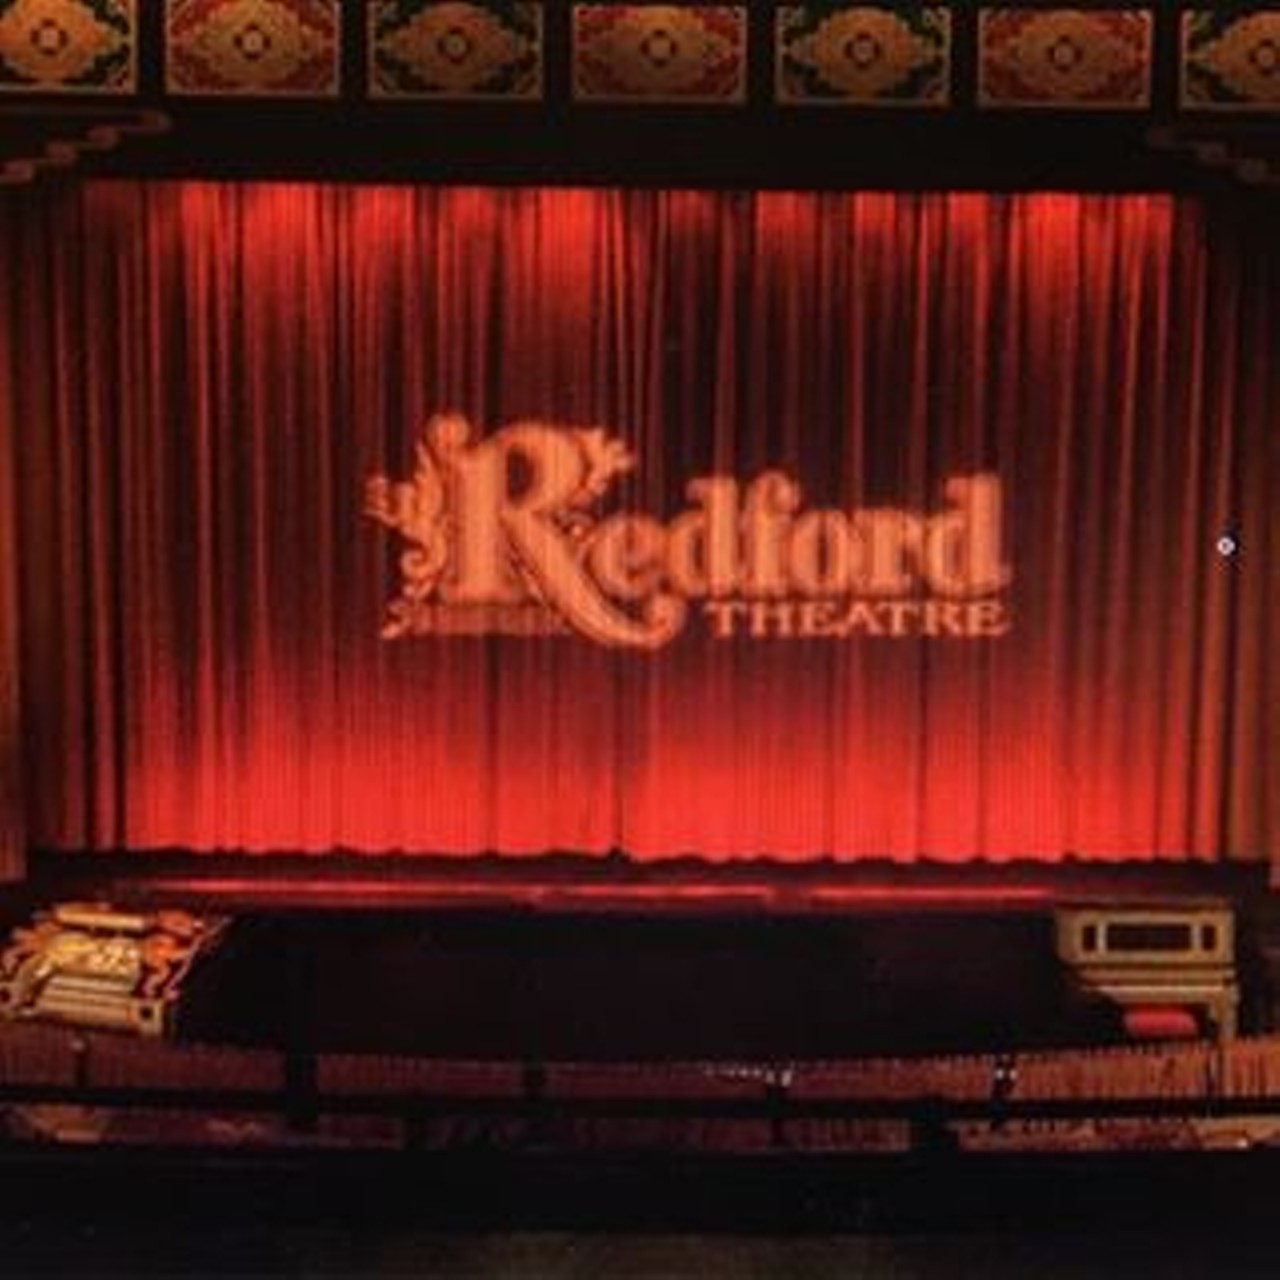 Catch a classic flick at the Redford Theatre
17360 Lahser Rd., Detroit; 313-537-2560
If you&#146;re looking to see a classic movie, the Redford Theatre offers great selections and tickets are just $5 a pop. Their current schedule includes Christmas favorites such as The Polar Express, White Christmas, Elf, and more. For more movies and times, check out the website.
Photo via Instagram user @redfordtheatre